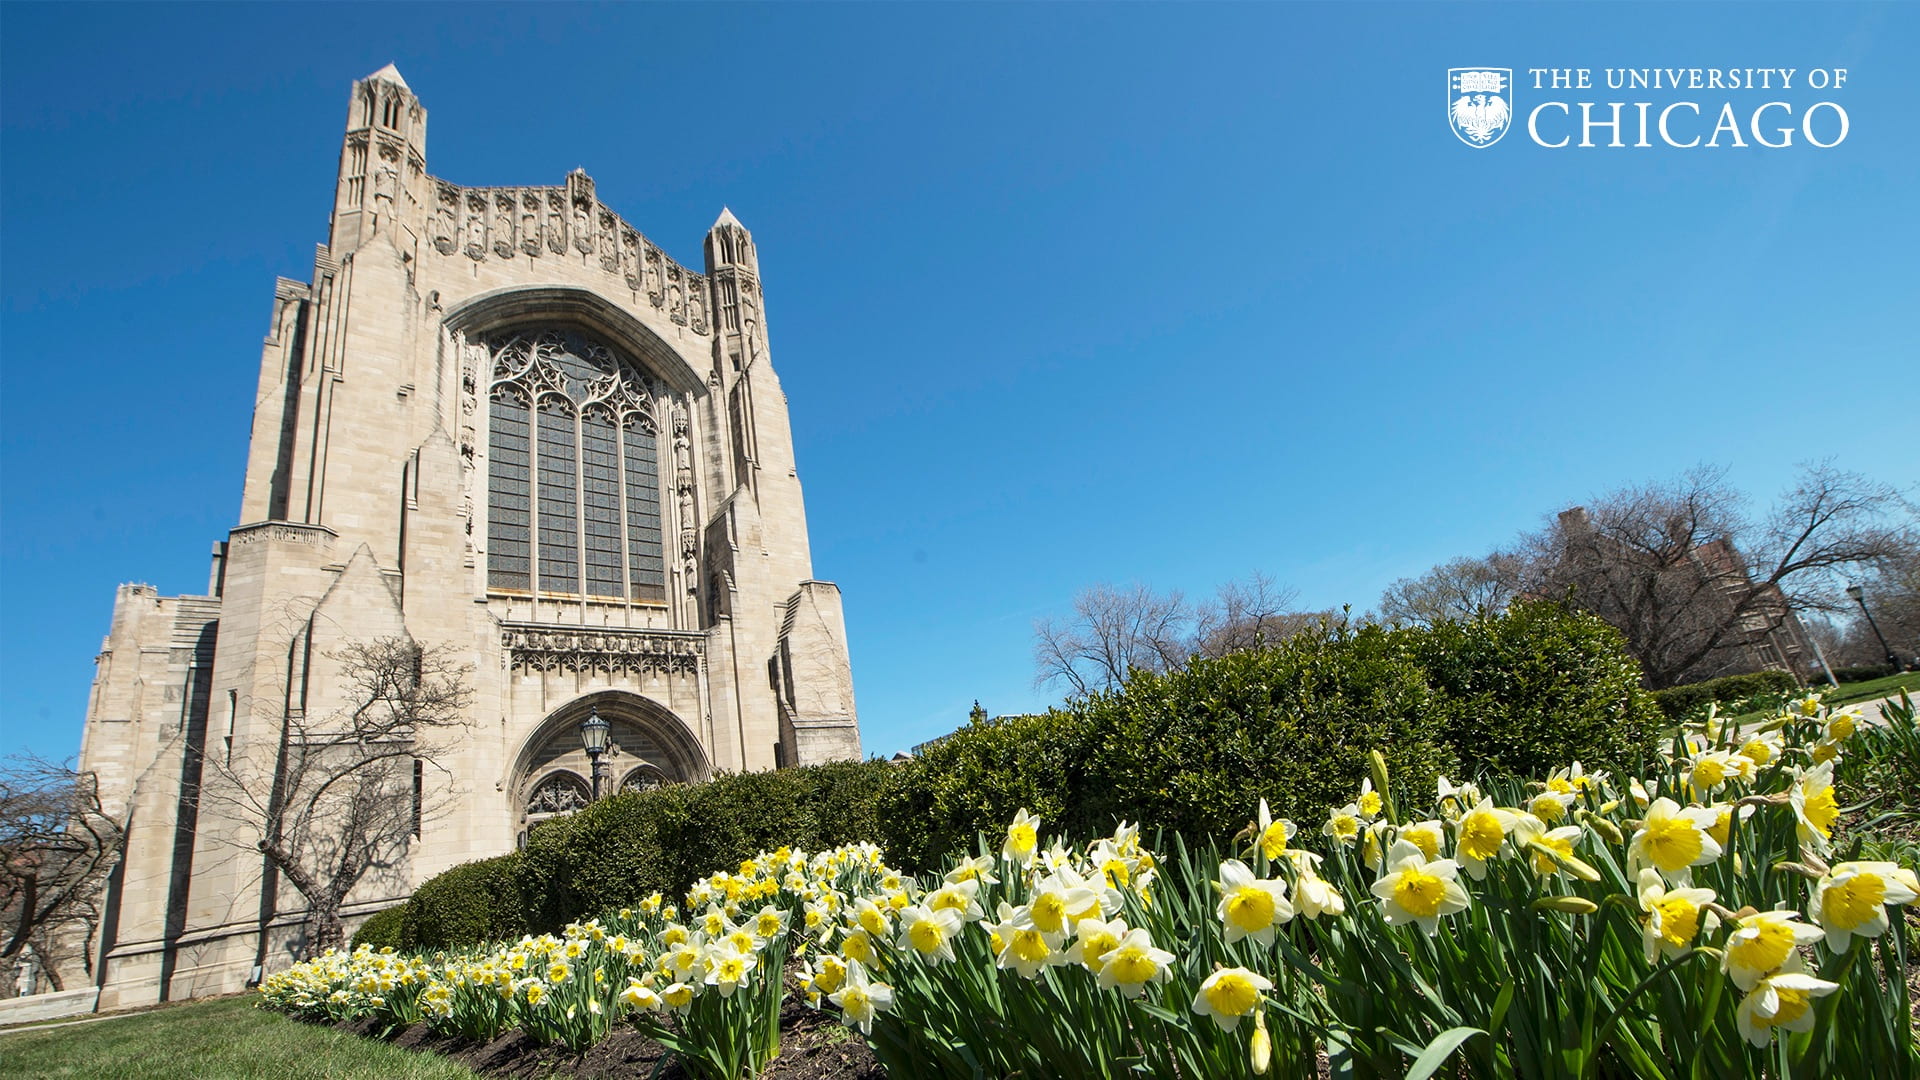 Looking up towards a tall white Gothic chapel with a row of yellow daffodils in the foreground